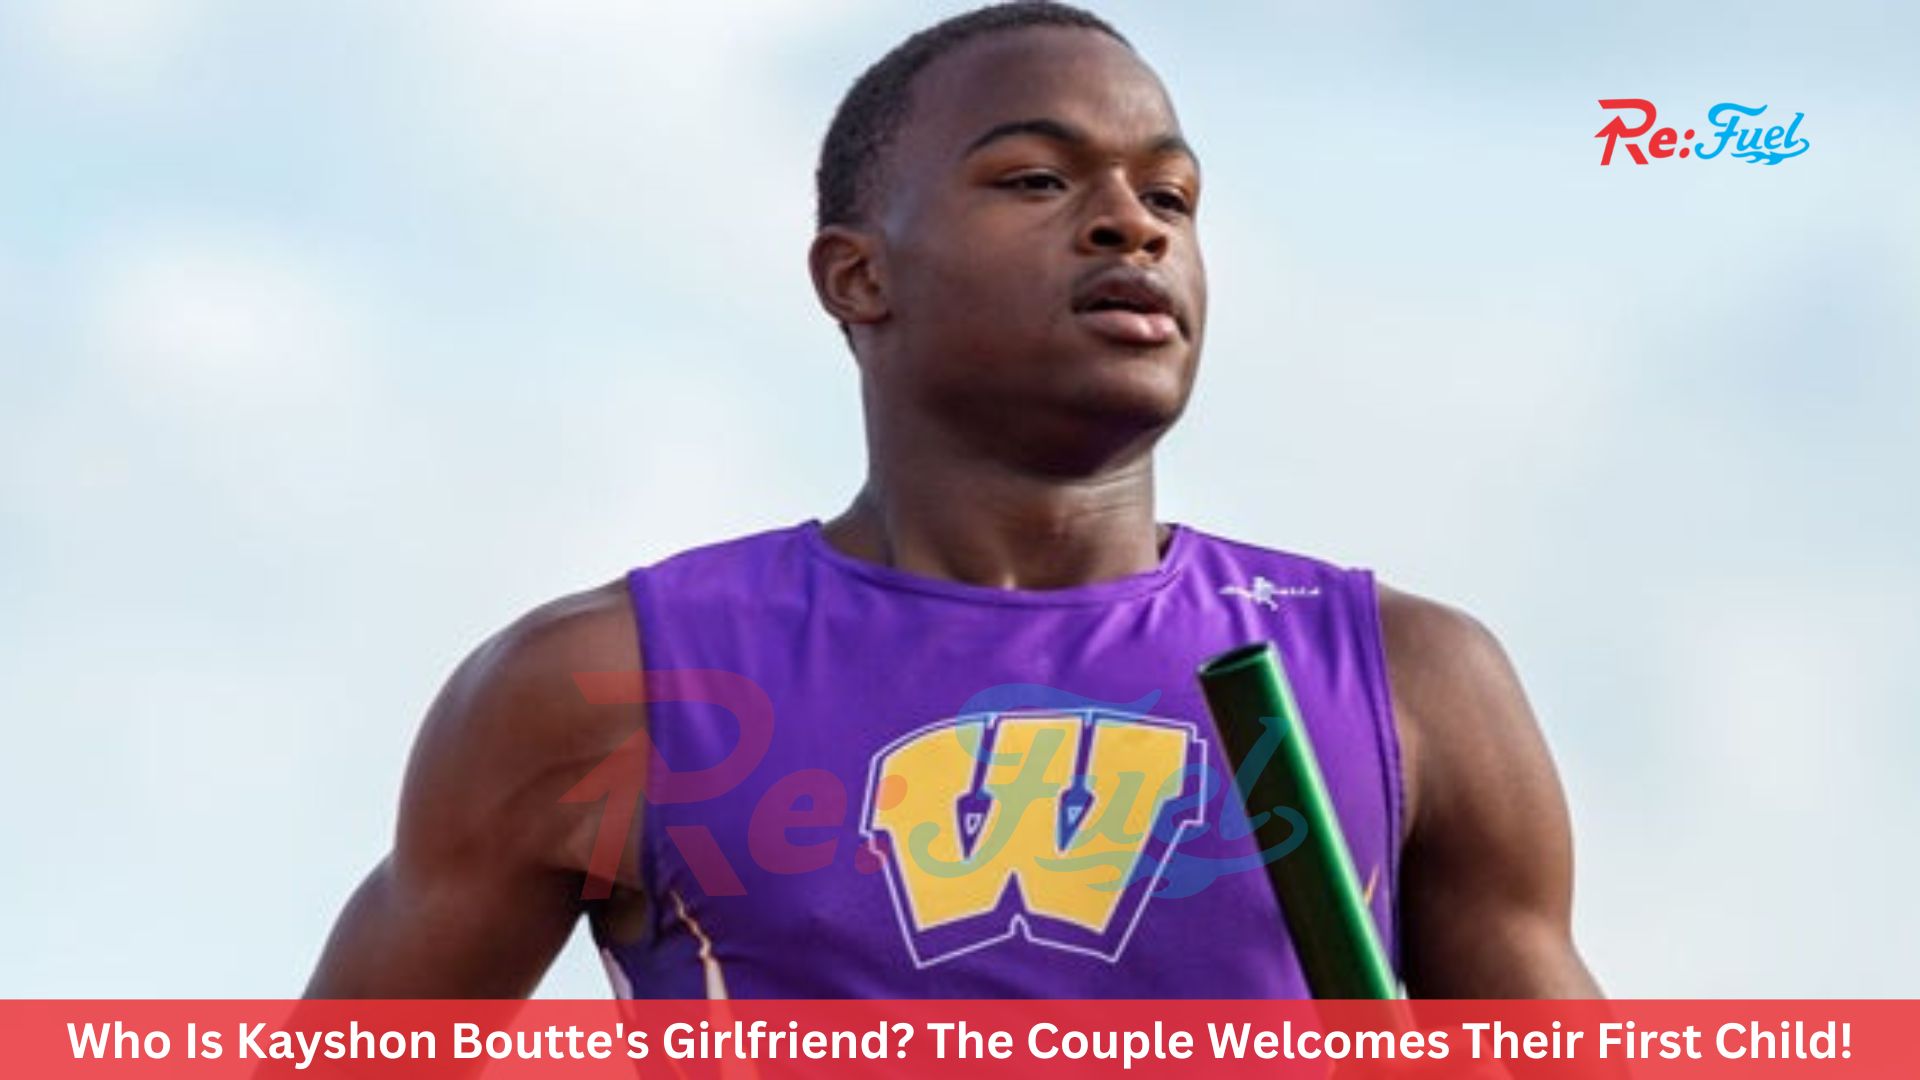 Who Is Kayshon Boutte's Girlfriend? The Couple Welcomes Their First Child!